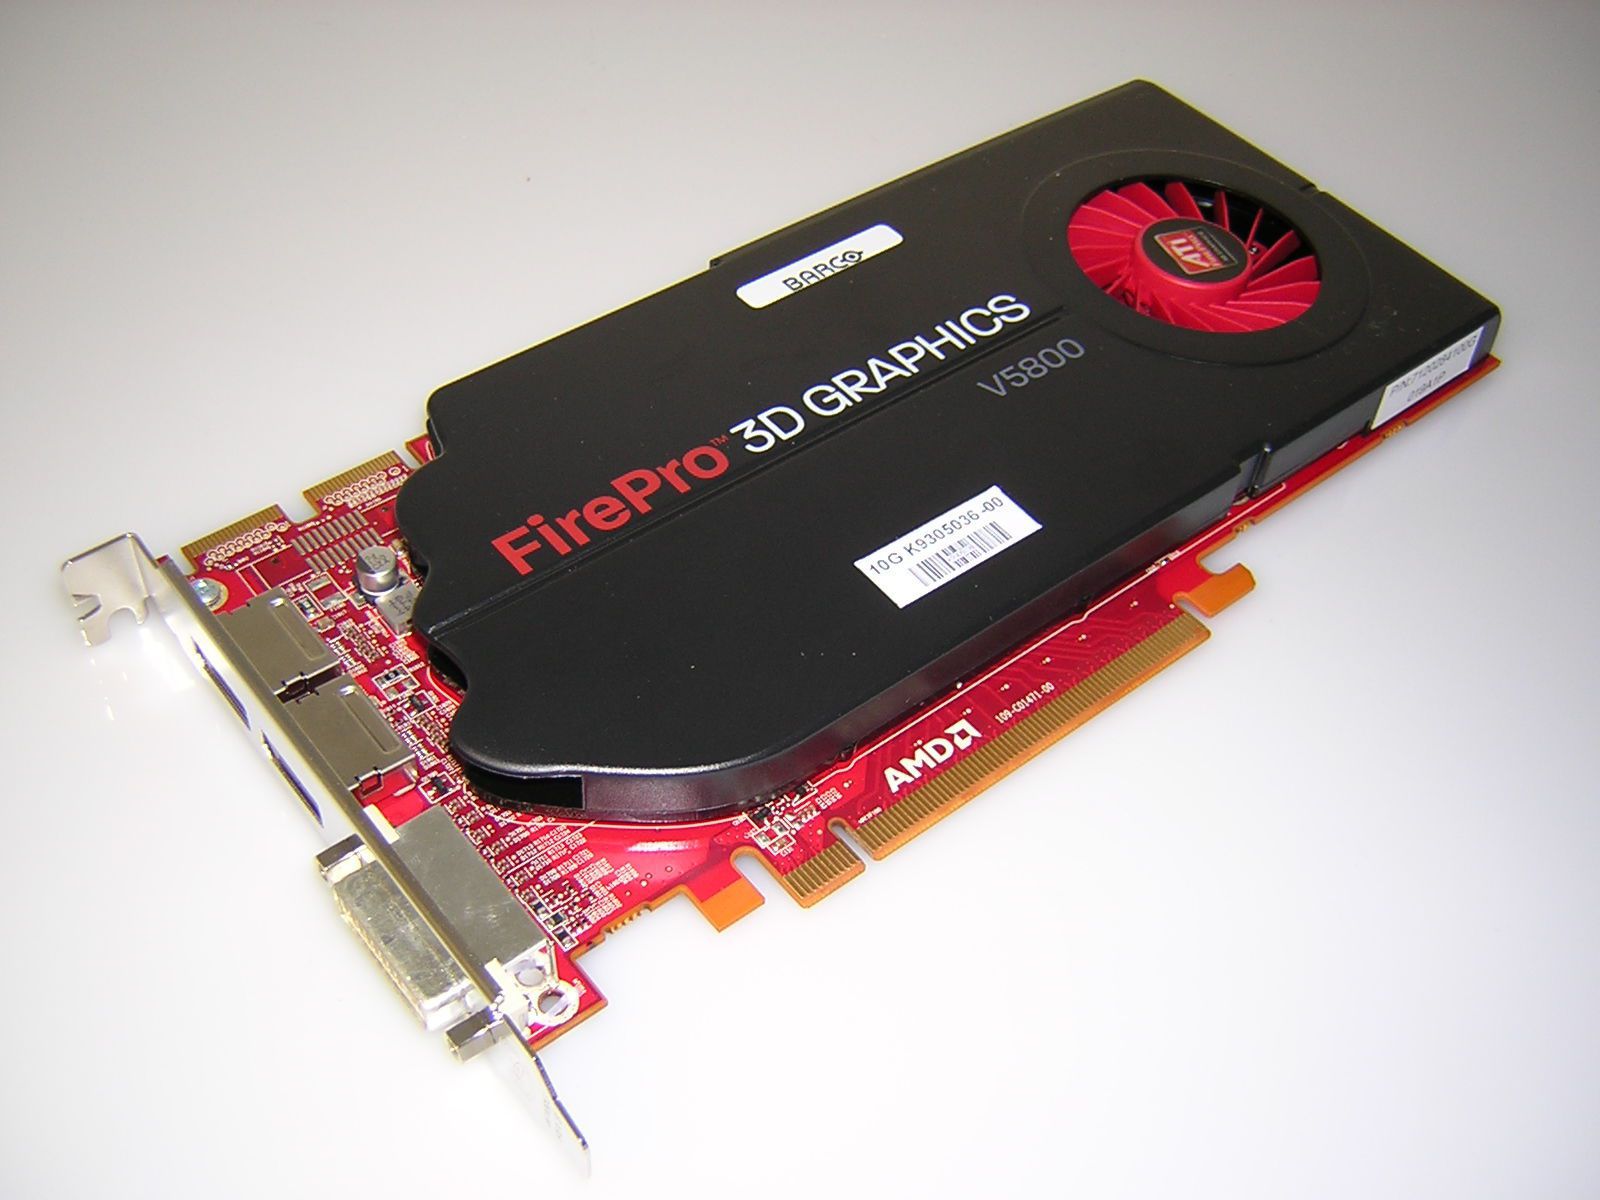 Digital graphic card (for medical imaging, PCI express) MXRT-5400 Barco